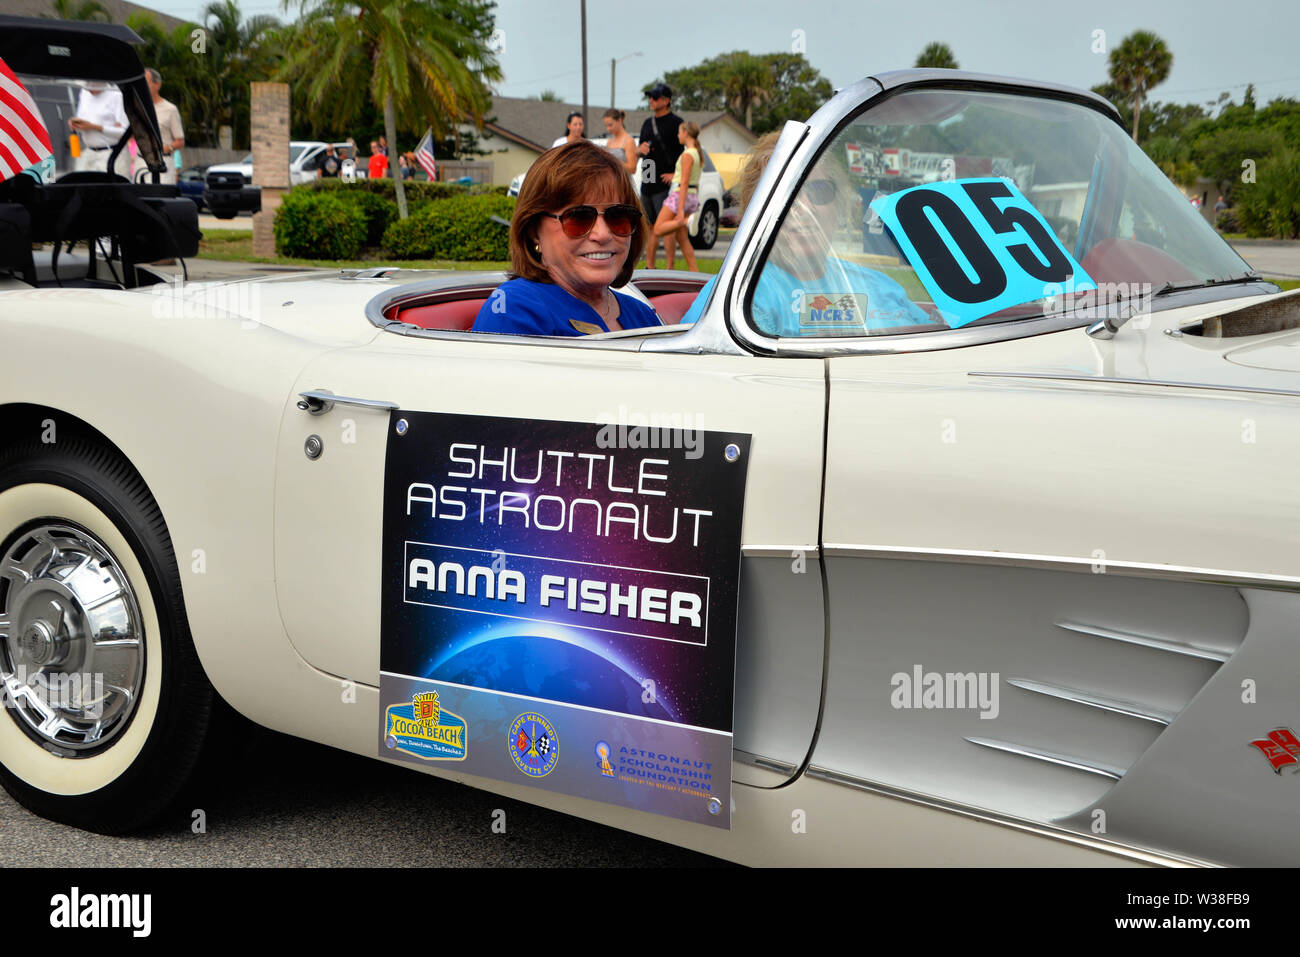 Cocoa Beach, Florida, USA. July 13, 2019. See our heroes as they ride through the City of Cocoa Beach in convertible Corvettes and witness the future of technology and innovation throughout the space industry! Former Apollo 15 Astronaut Al Worden with Space Shuttle Astronauts recreate the historic “Astronaut Corvette parade of the 60's.” Photo Credit: Julian Leek/Alamy Live News Stock Photo